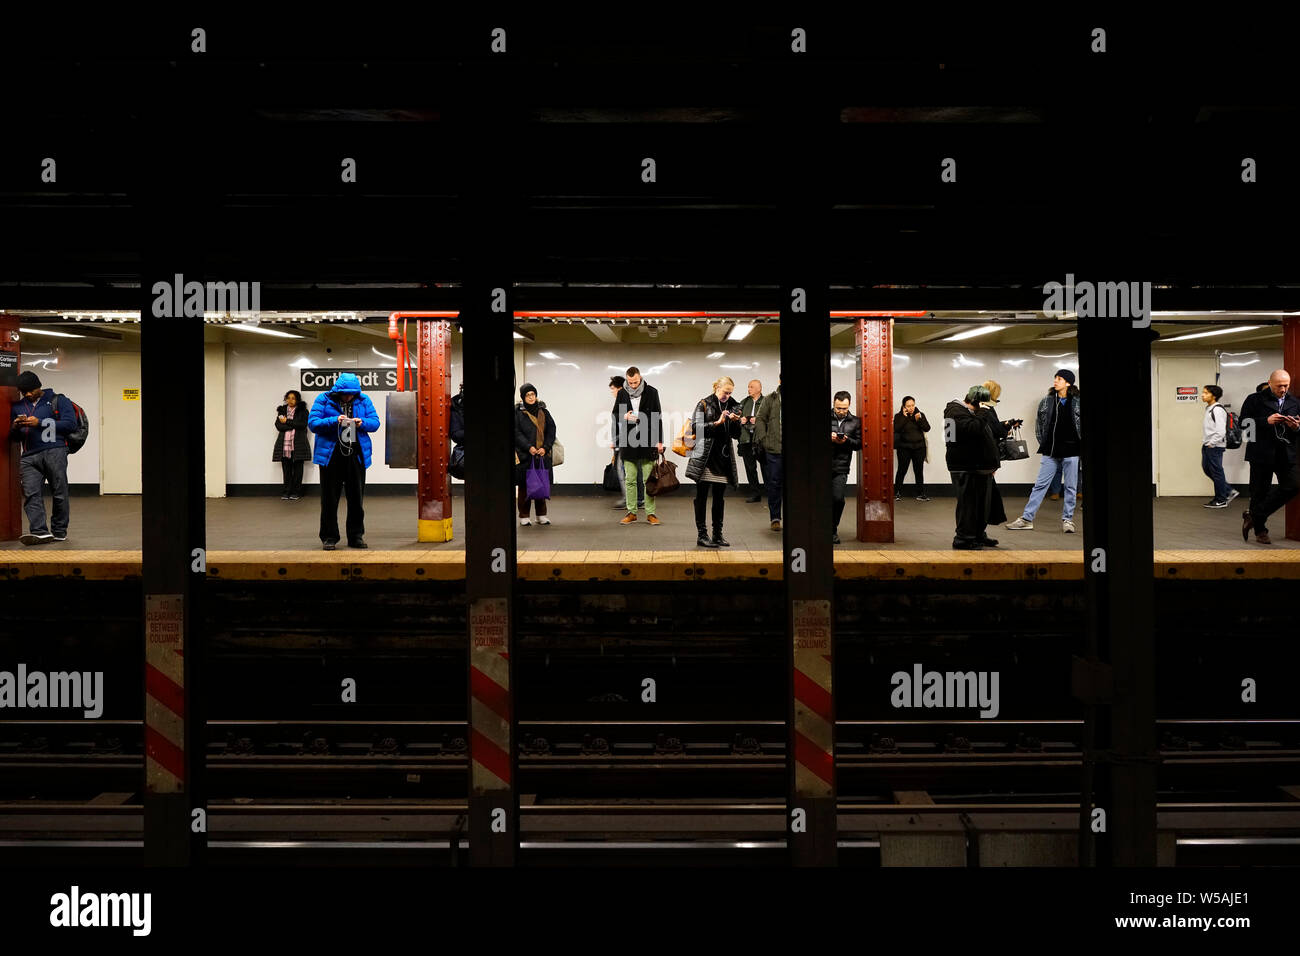 Passengers of the New York City Subway waiting for the train at the station 'Cortlandt Street'. Manhatten, New York City, New York, United States Stock Photo